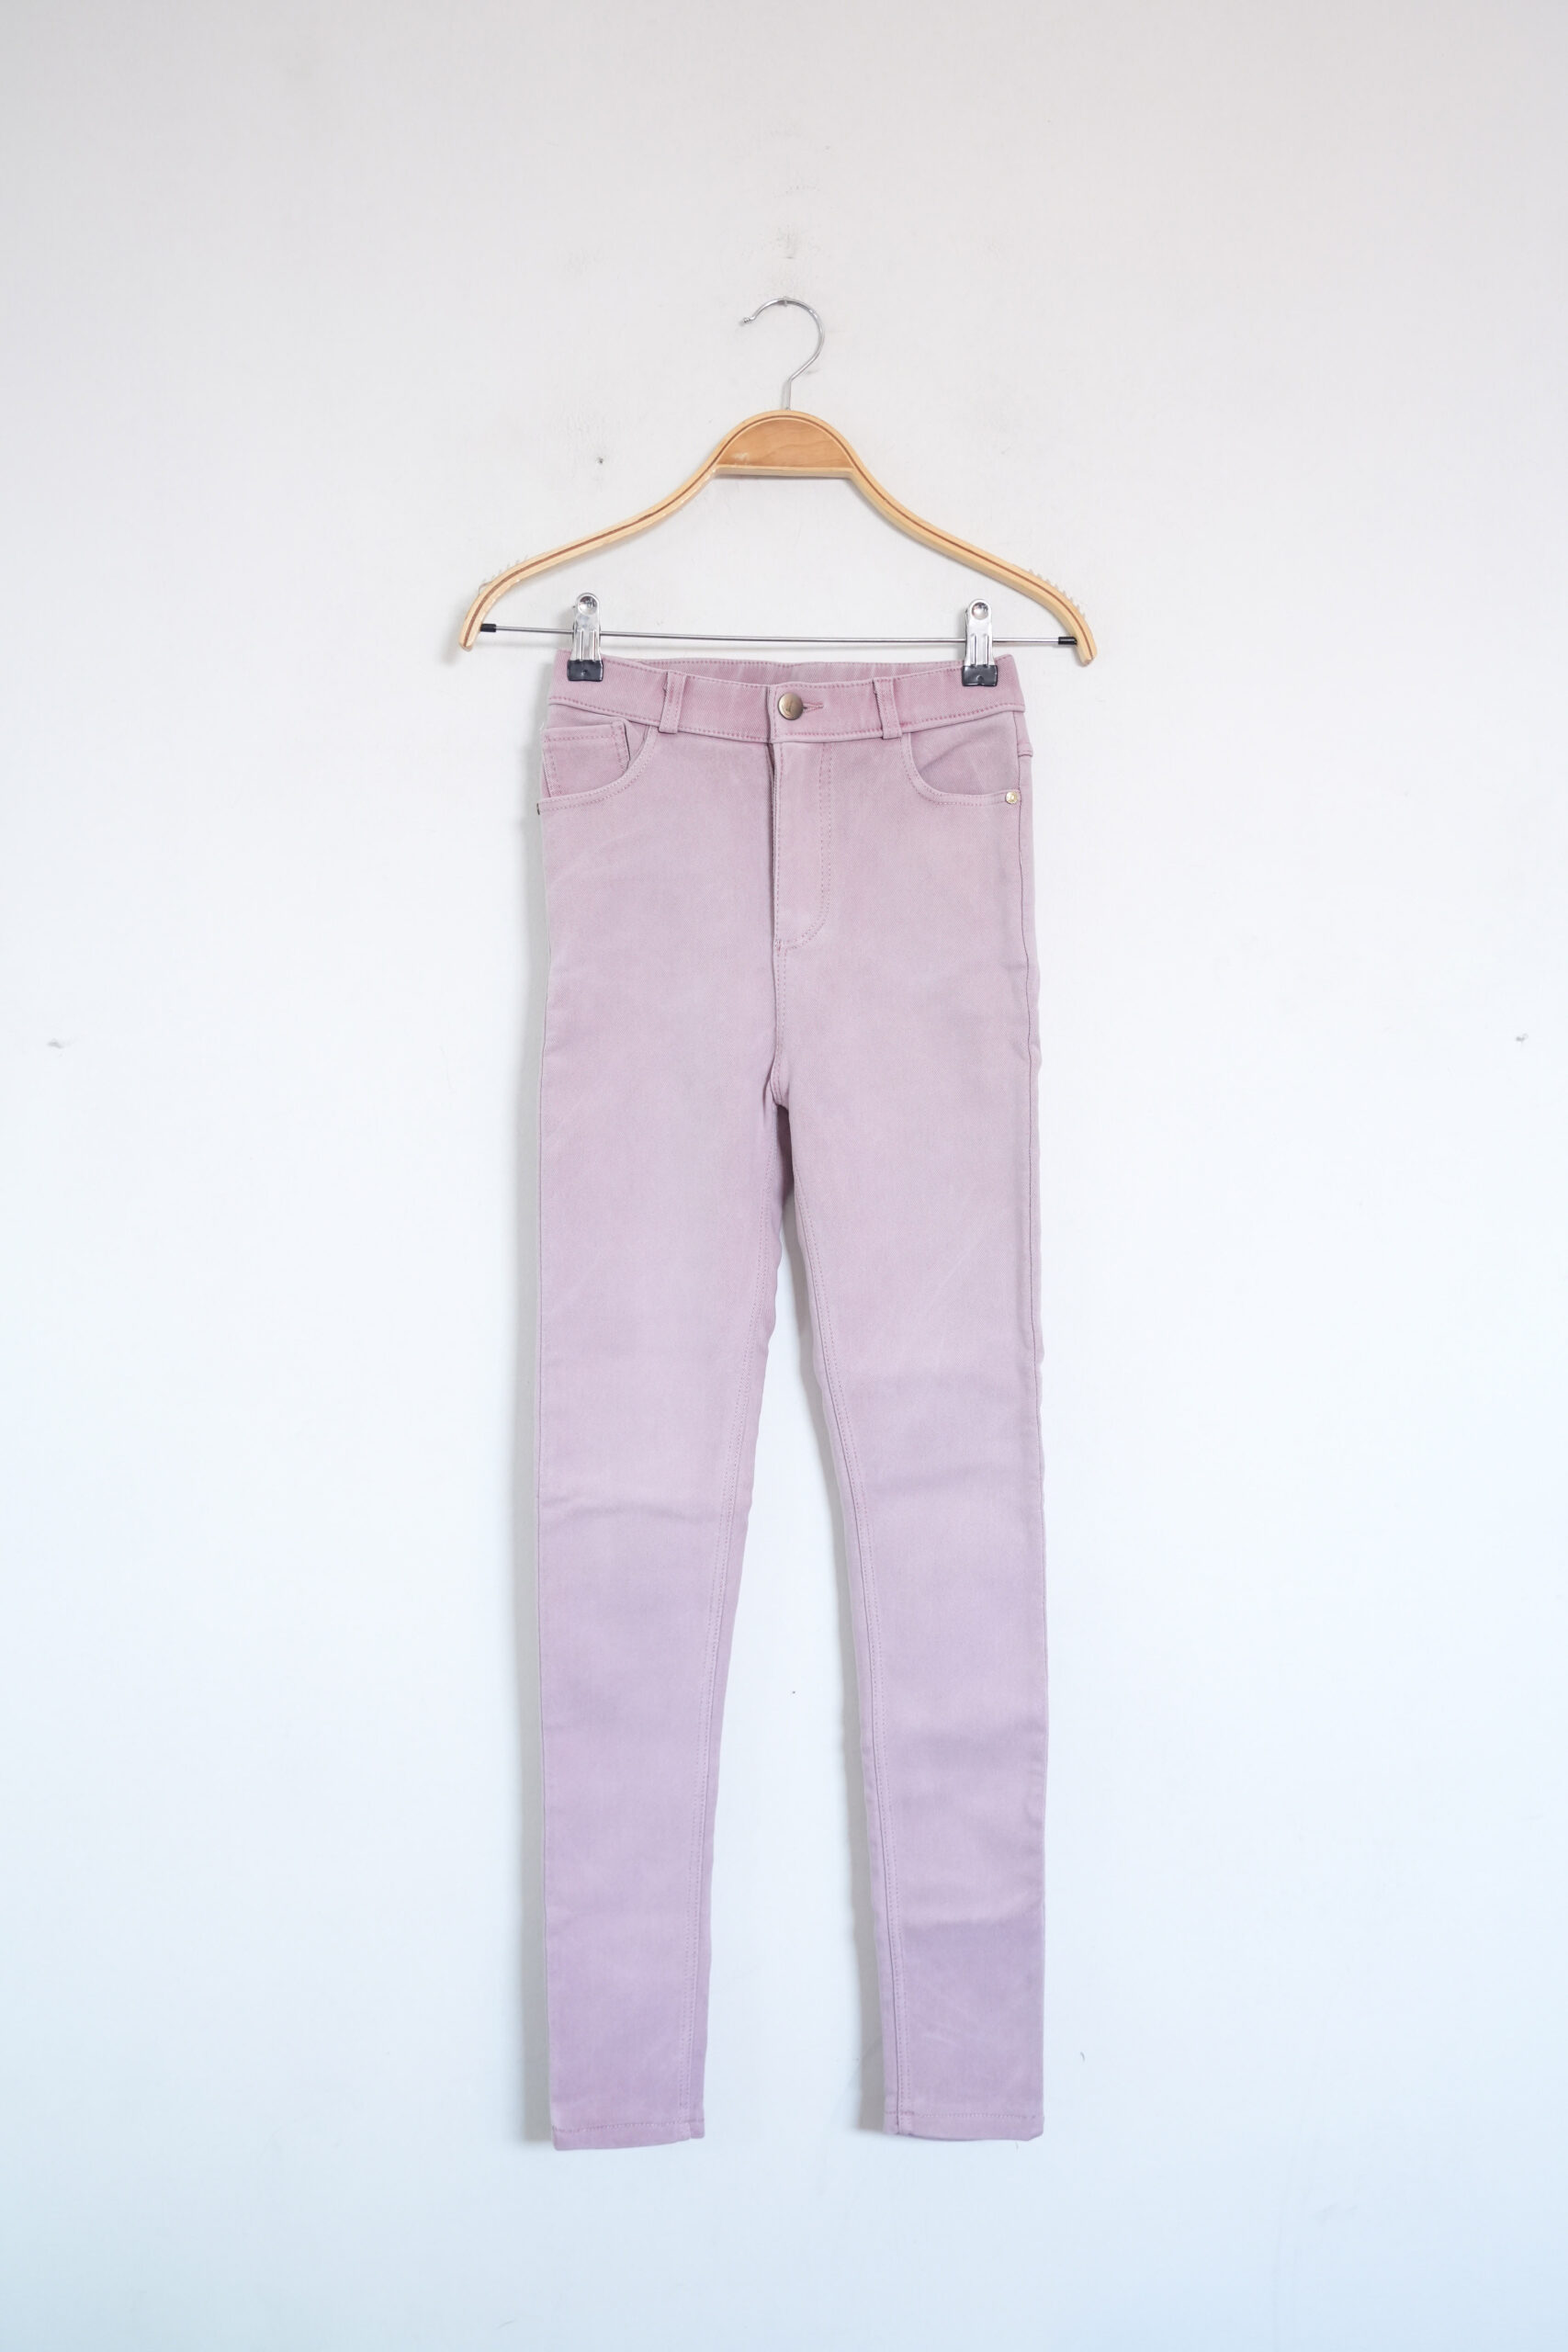 Powder Pink Skinny Stretcahble Jeans